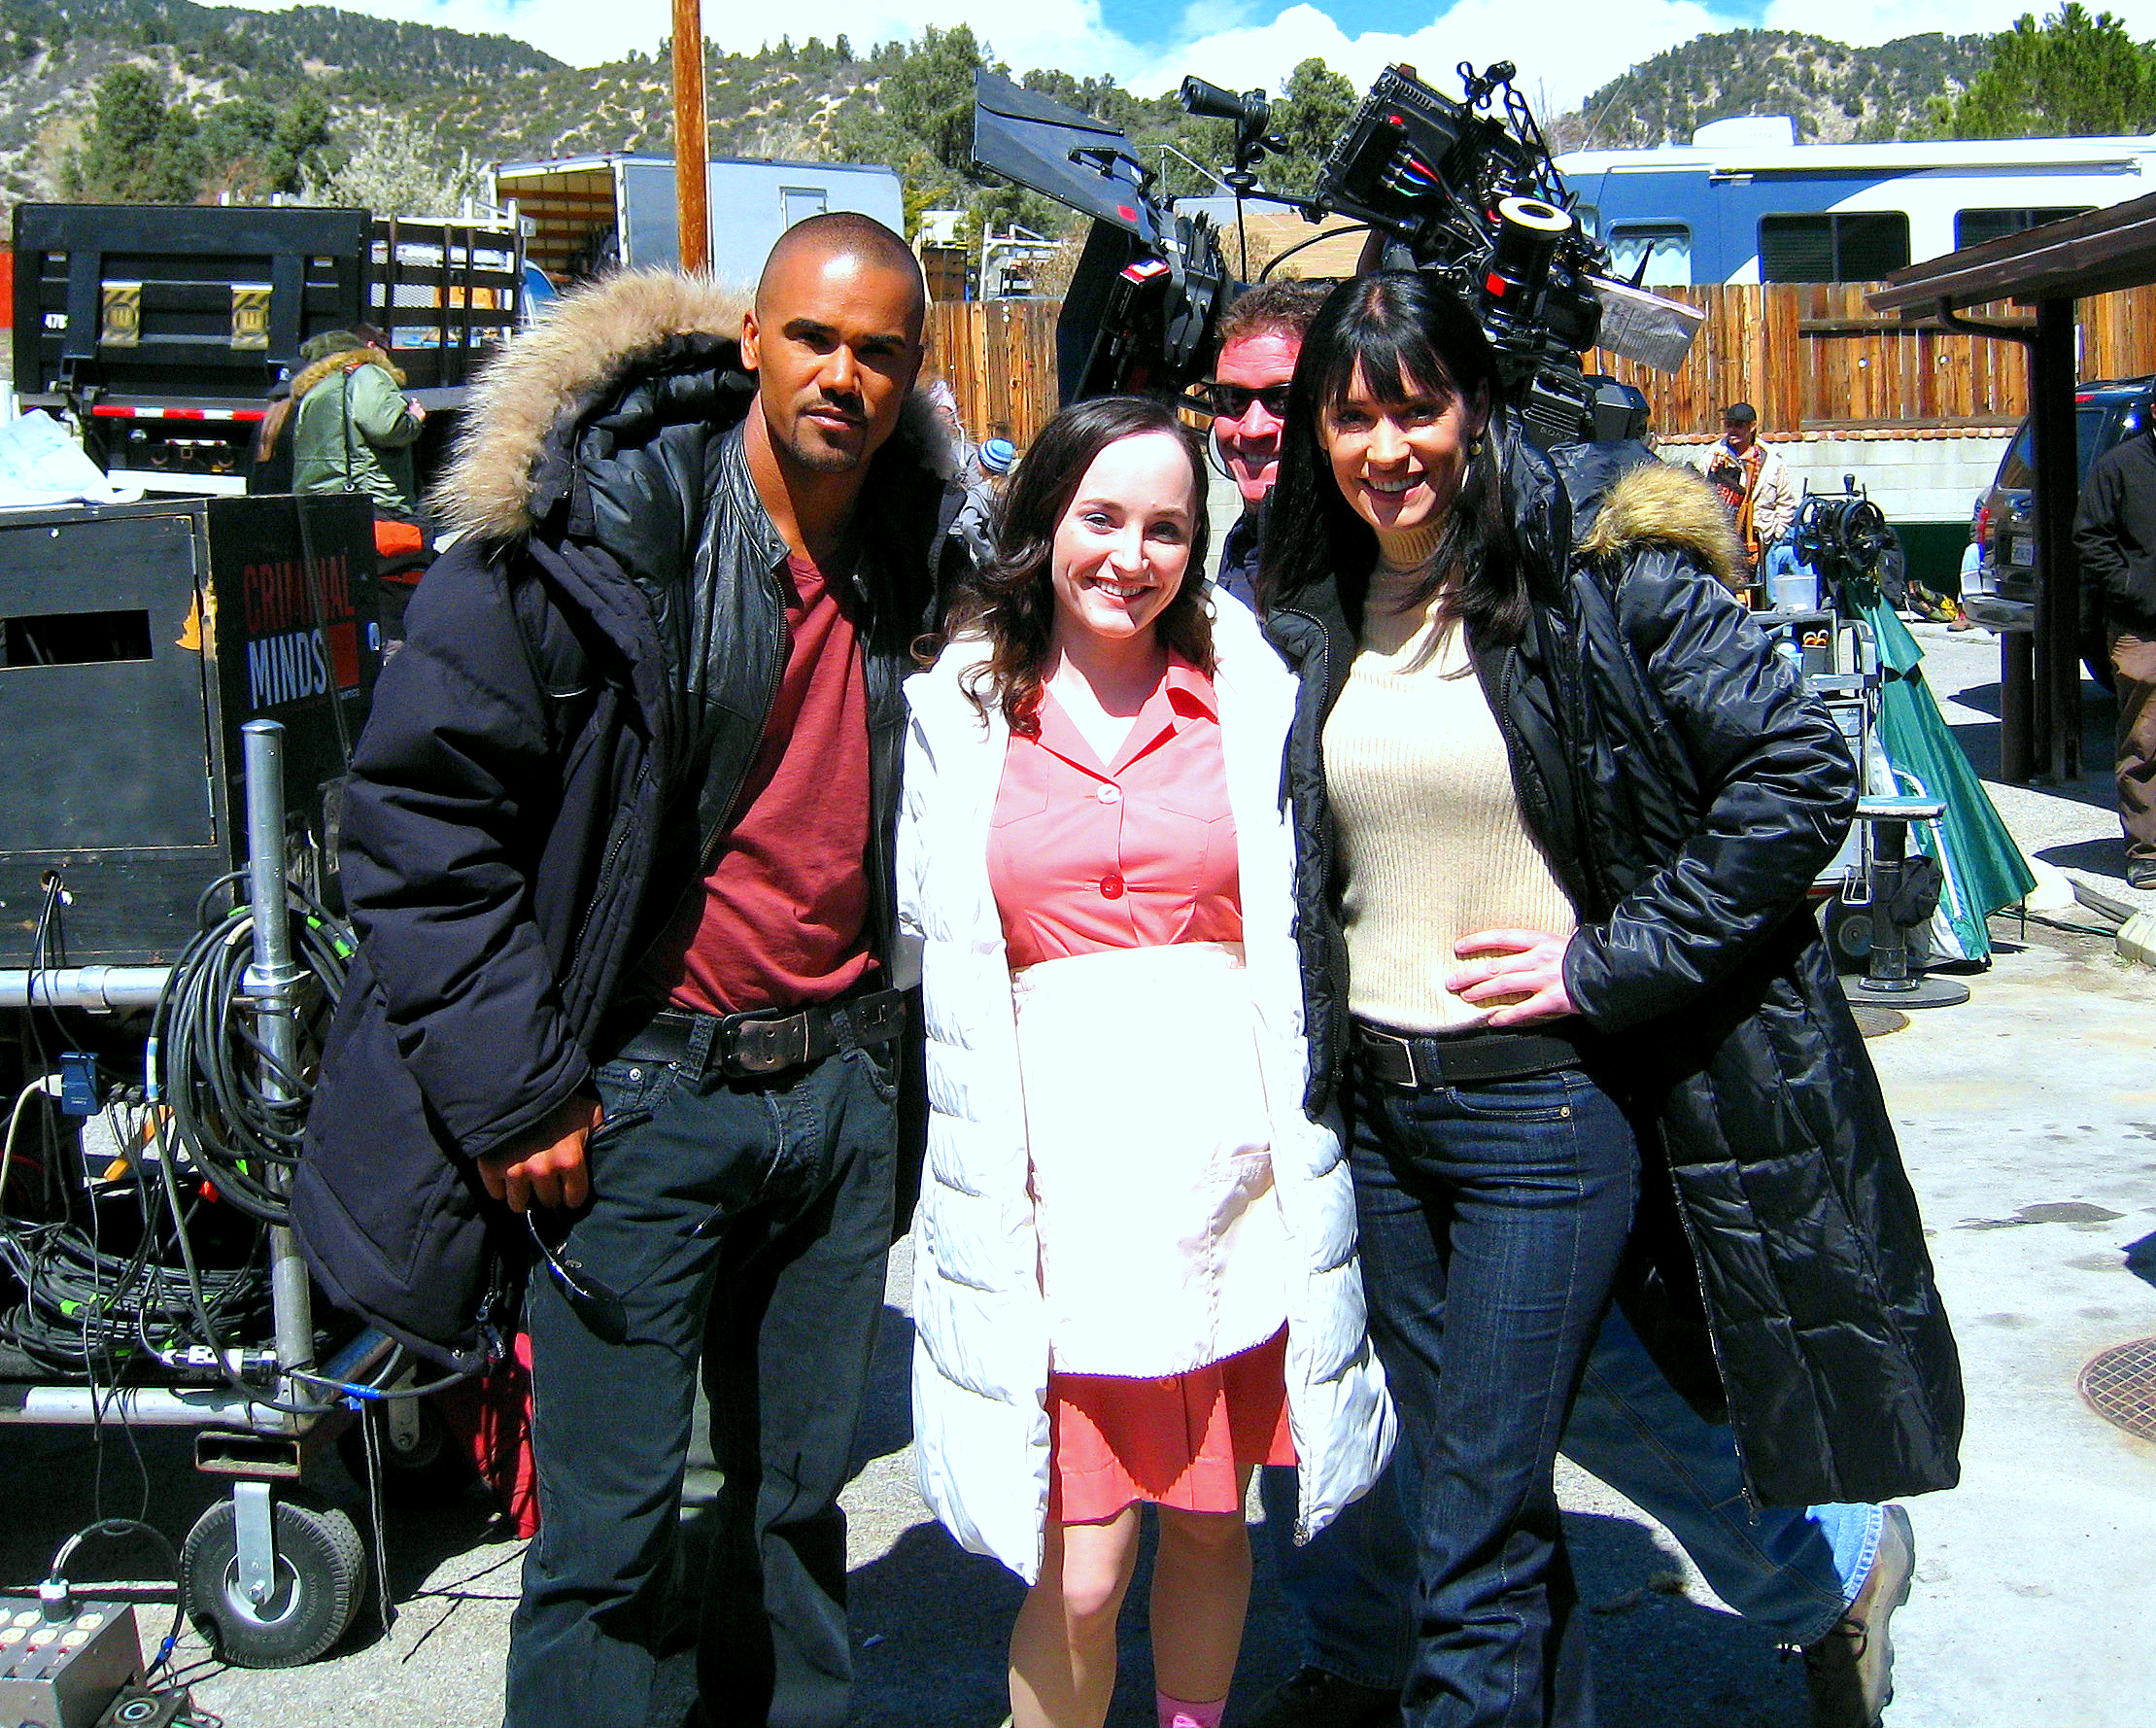 On the set of Criminal minds with Paget Brewster and Shemar Moore.